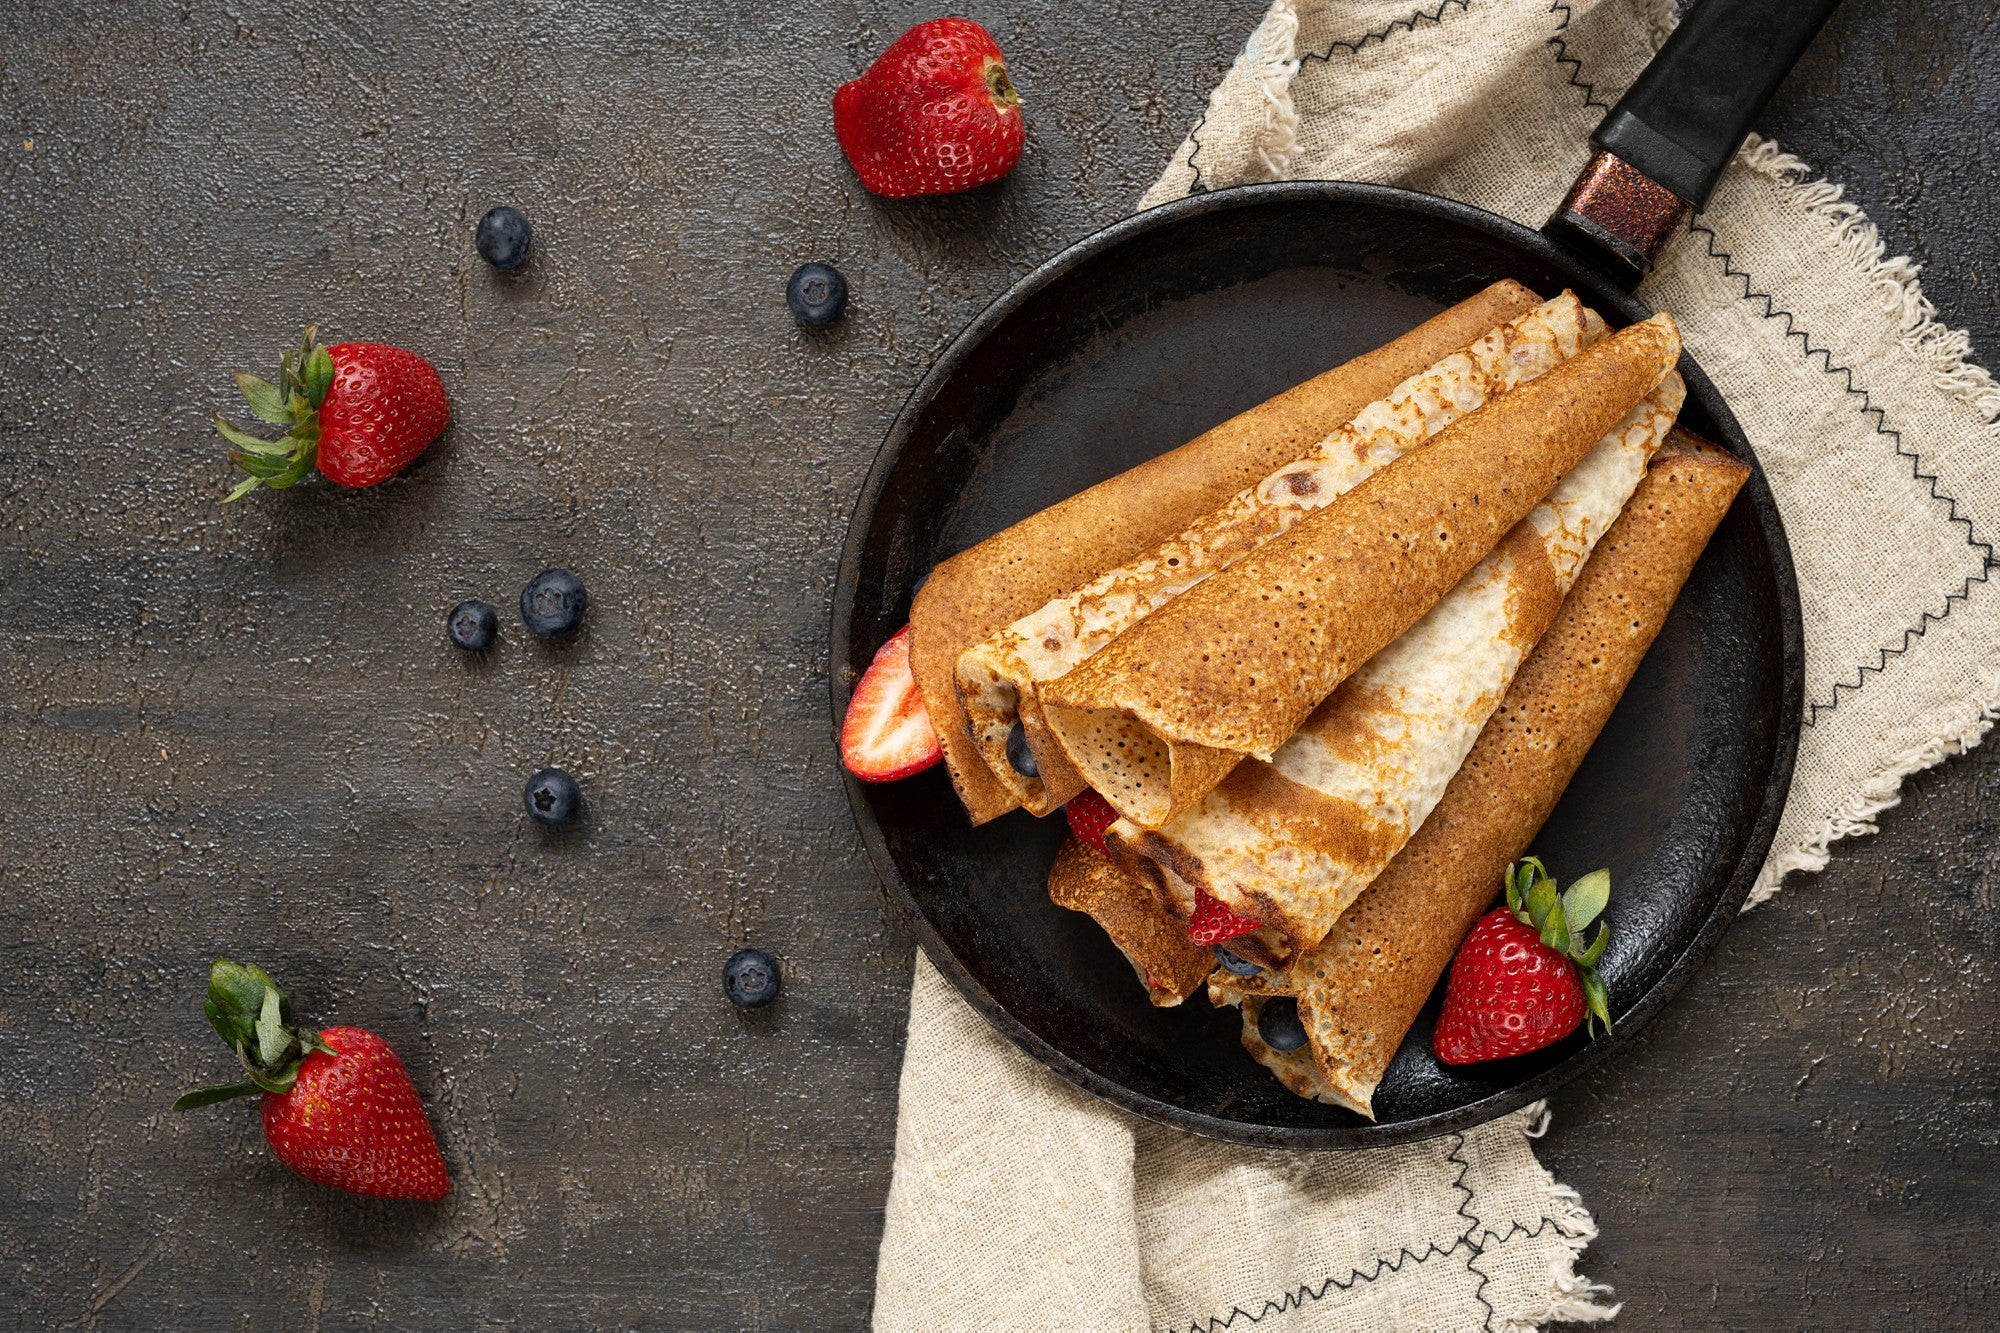 Whisk and Flip: How to Make Perfect Buckwheat Crepes at Home